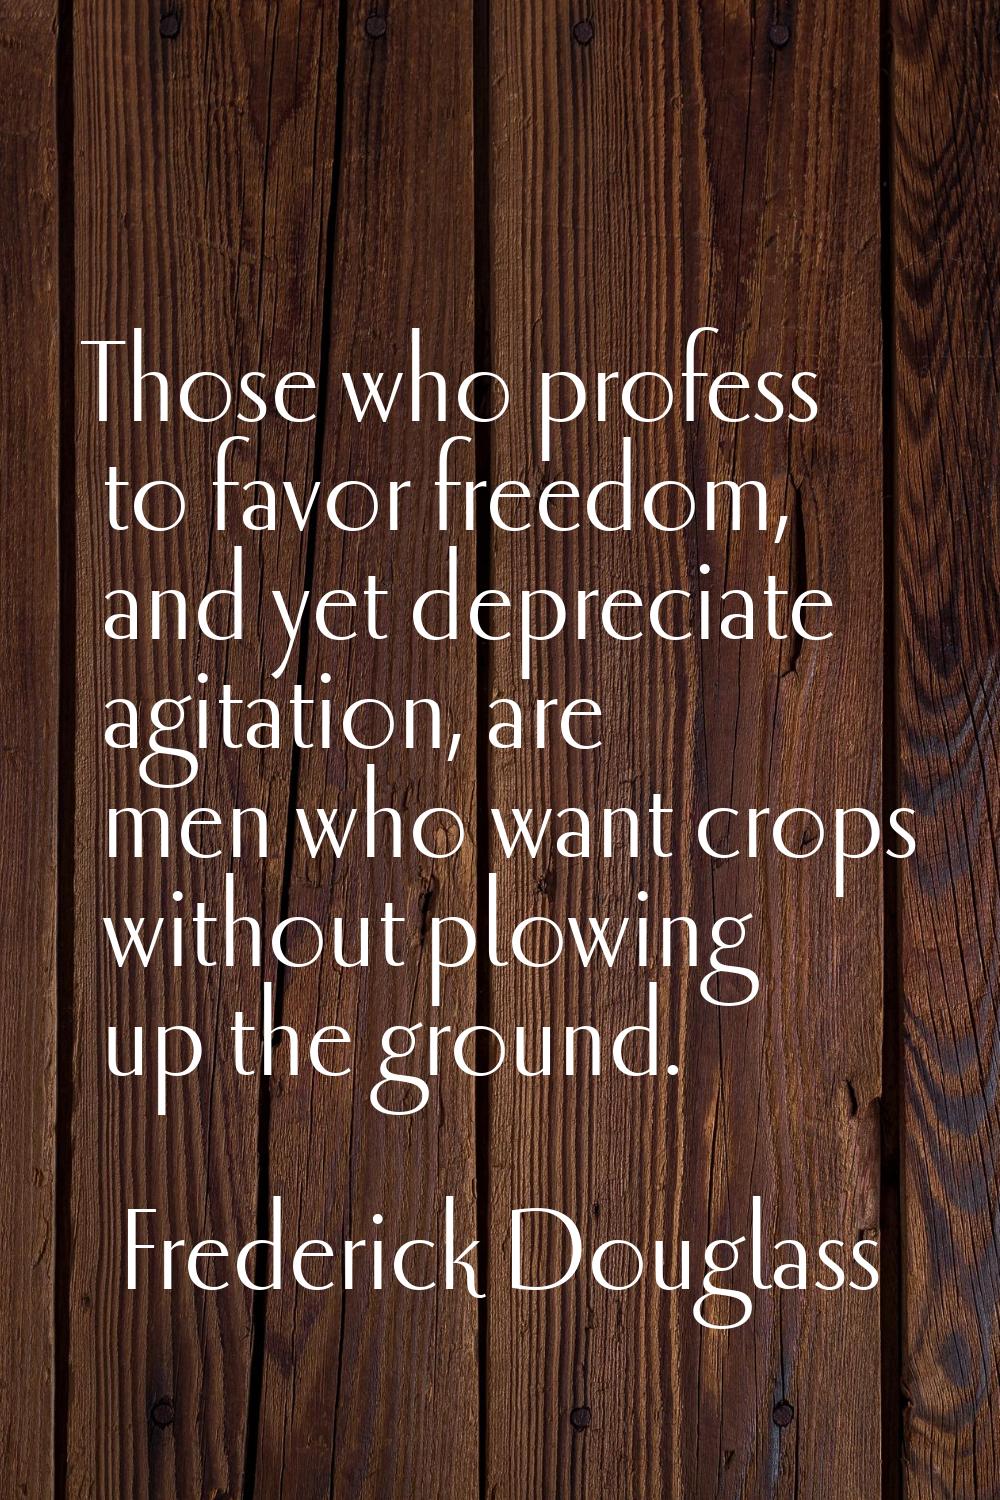 Those who profess to favor freedom, and yet depreciate agitation, are men who want crops without pl